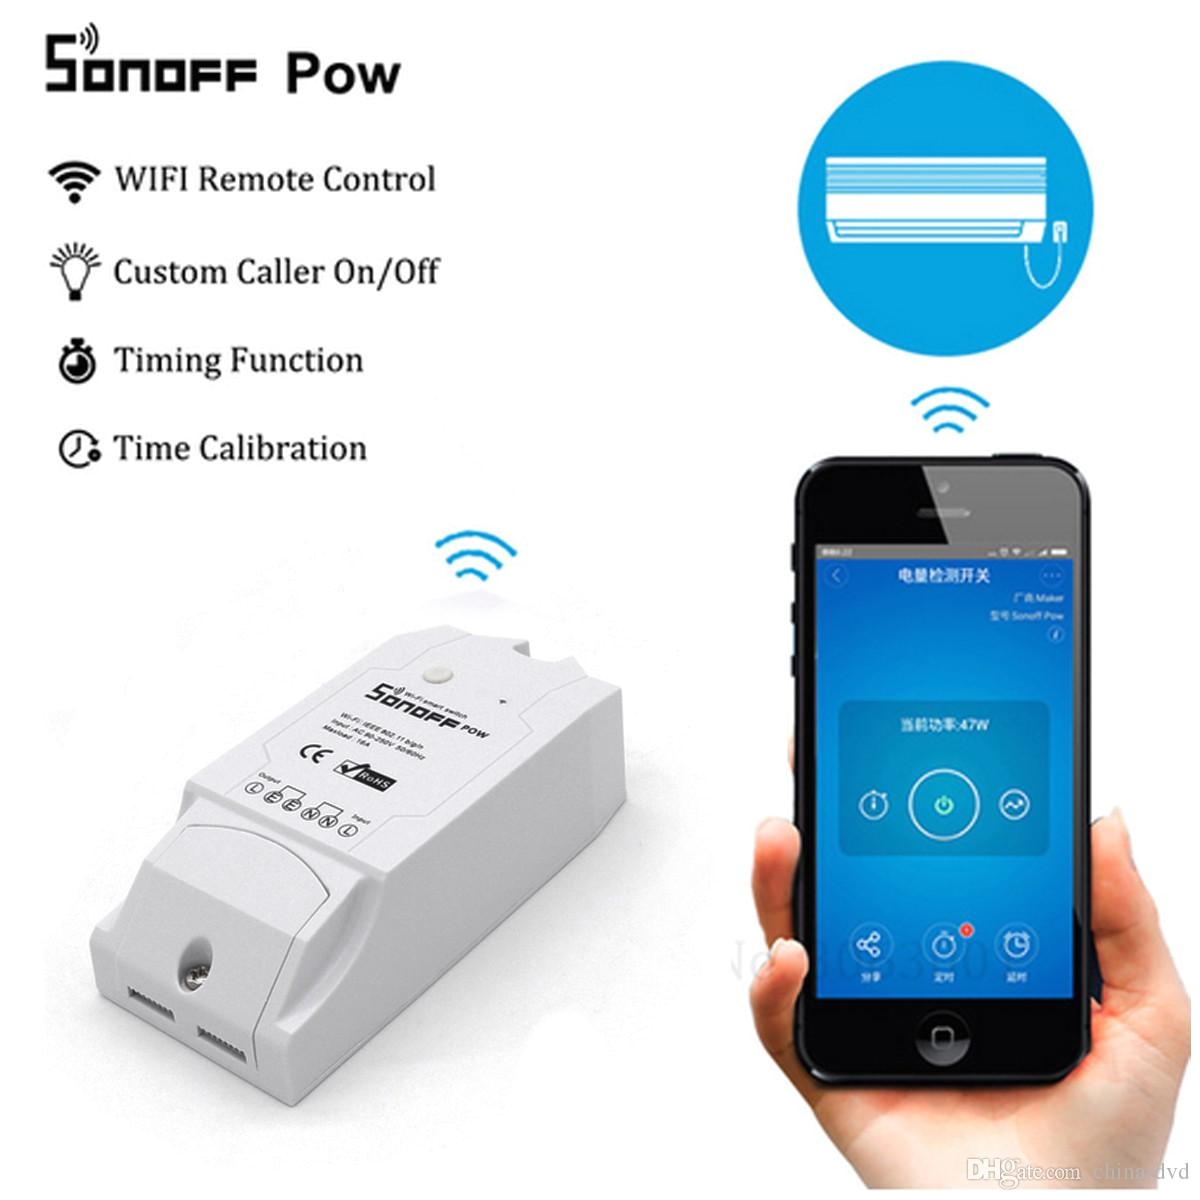 authentic sonoff pow smart wifi switch controller with real time power consumption measurement 16a 3500w smart home device via android ios sonoff pow smart